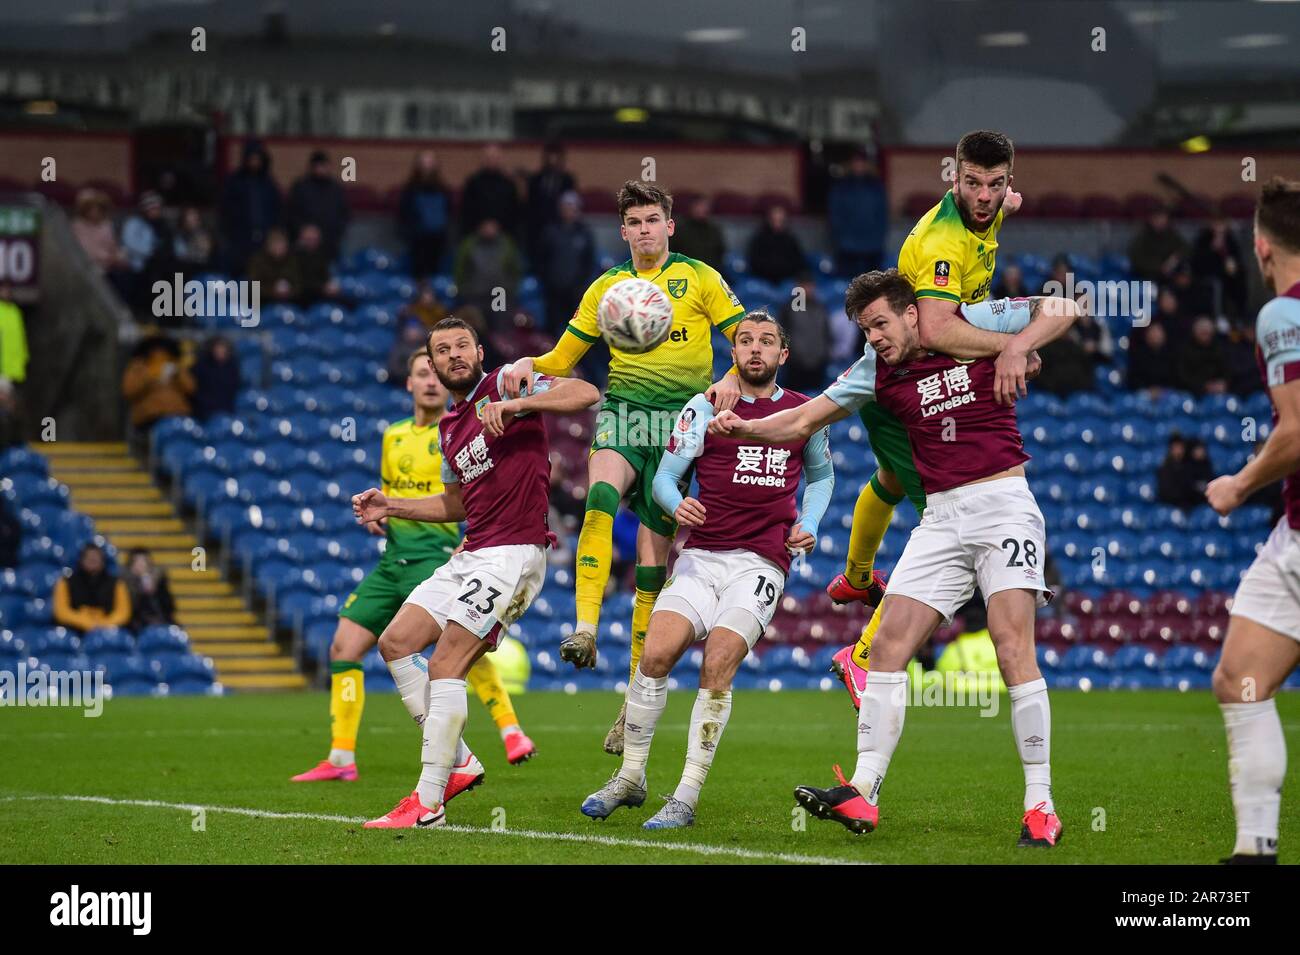 25th January 2020, Turf Moor, Burnley, England; Emirates FA Cup, Burnley v Norwich City : Grant Hanley (5) of Norwich City heads the ball in to make it 0-1 Stock Photo